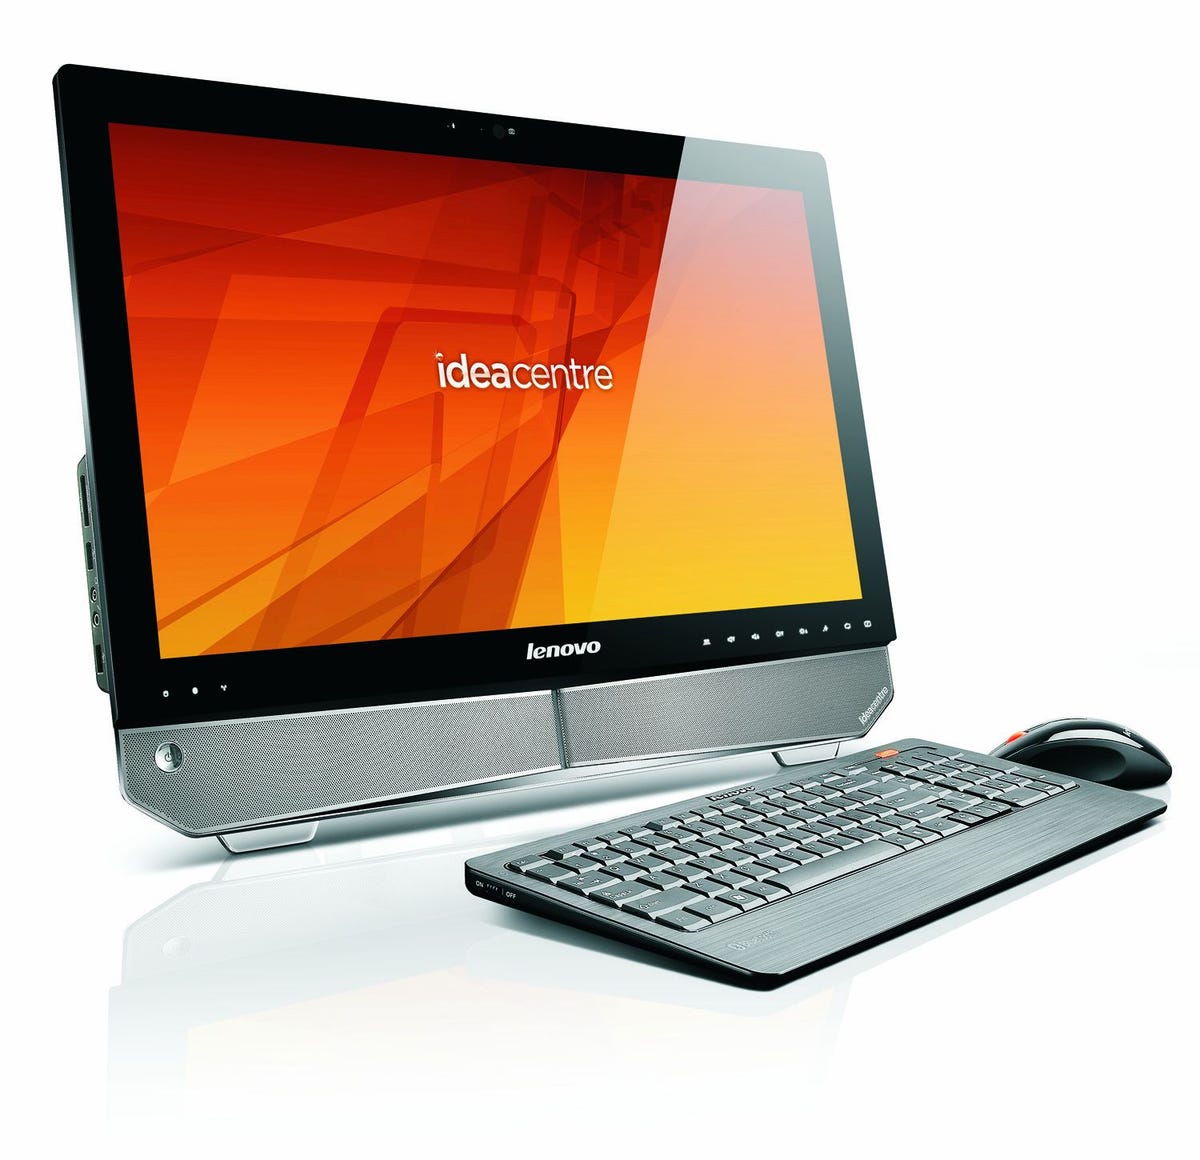 Lenovo's new IdeaCentre B520 is a 3D Vision-enabled all-in-one desktop slated to hit the U.S. in June.